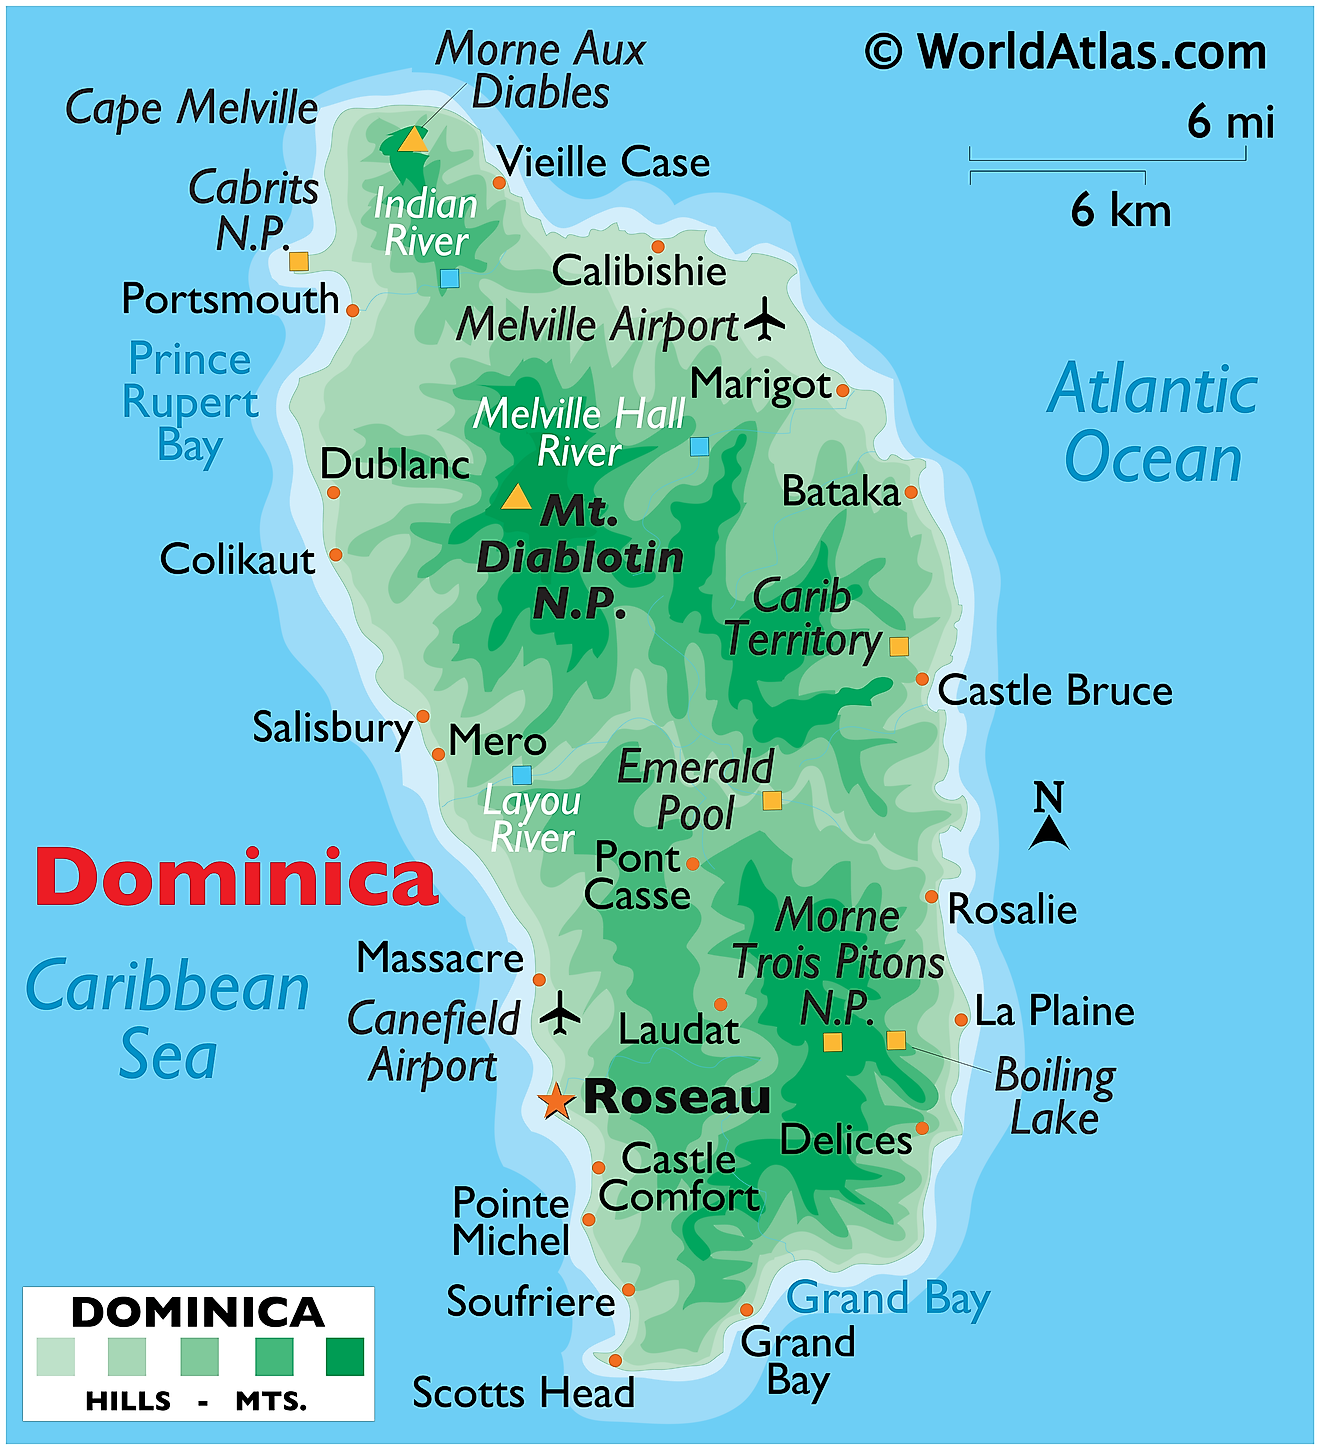 Physical Map of Dominica showing terrain, highest point, important settlements, airports, surrounding water bodies, etc.